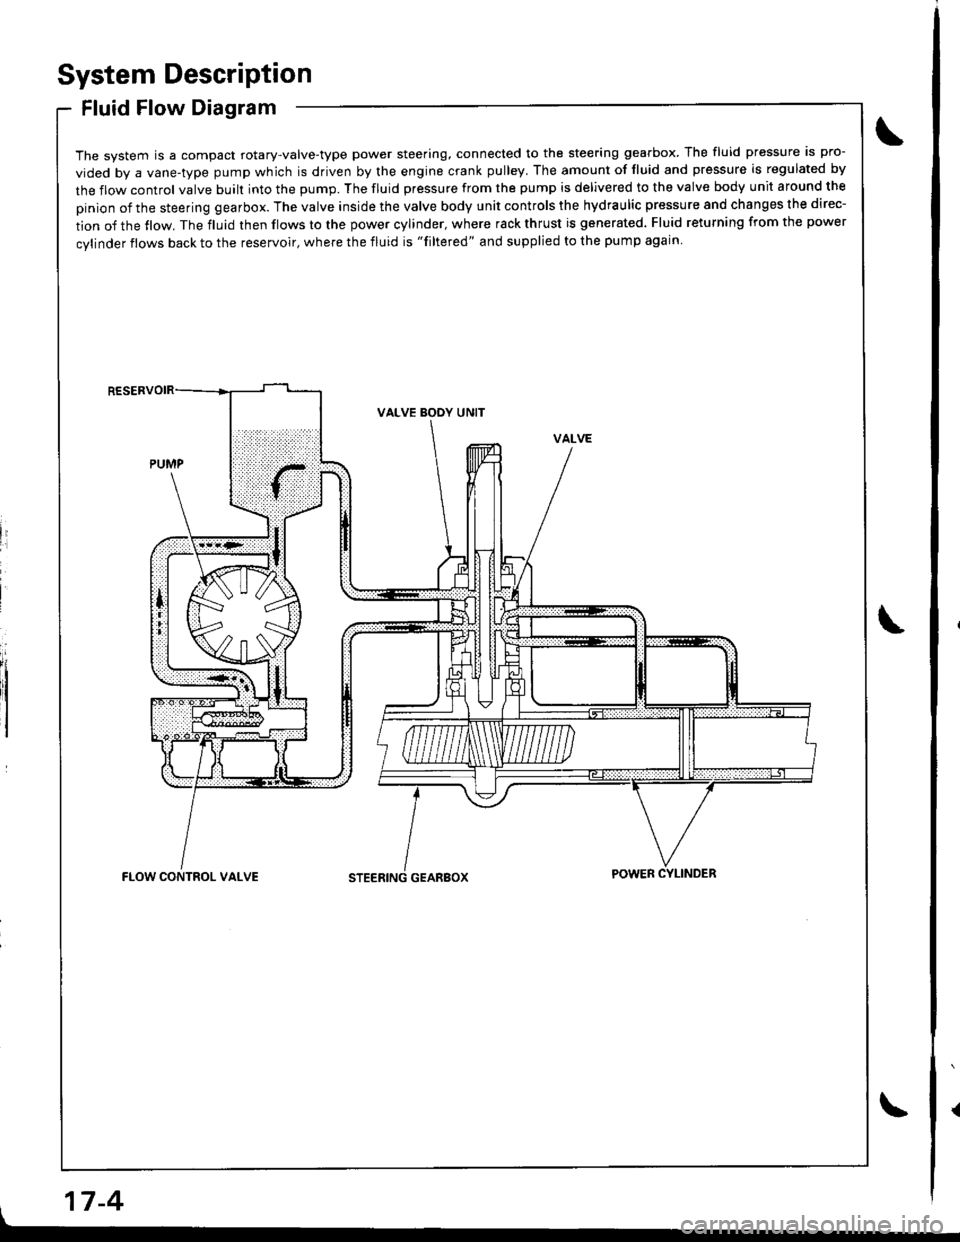 HONDA INTEGRA 1998 4.G Workshop Manual System Description
Fluid Flow Diagram
The system is a compact rotary-valve-type power steering, connected to the steering gearbox. The fluid pressure is pro-
vided by a vane-type pump which is driven 